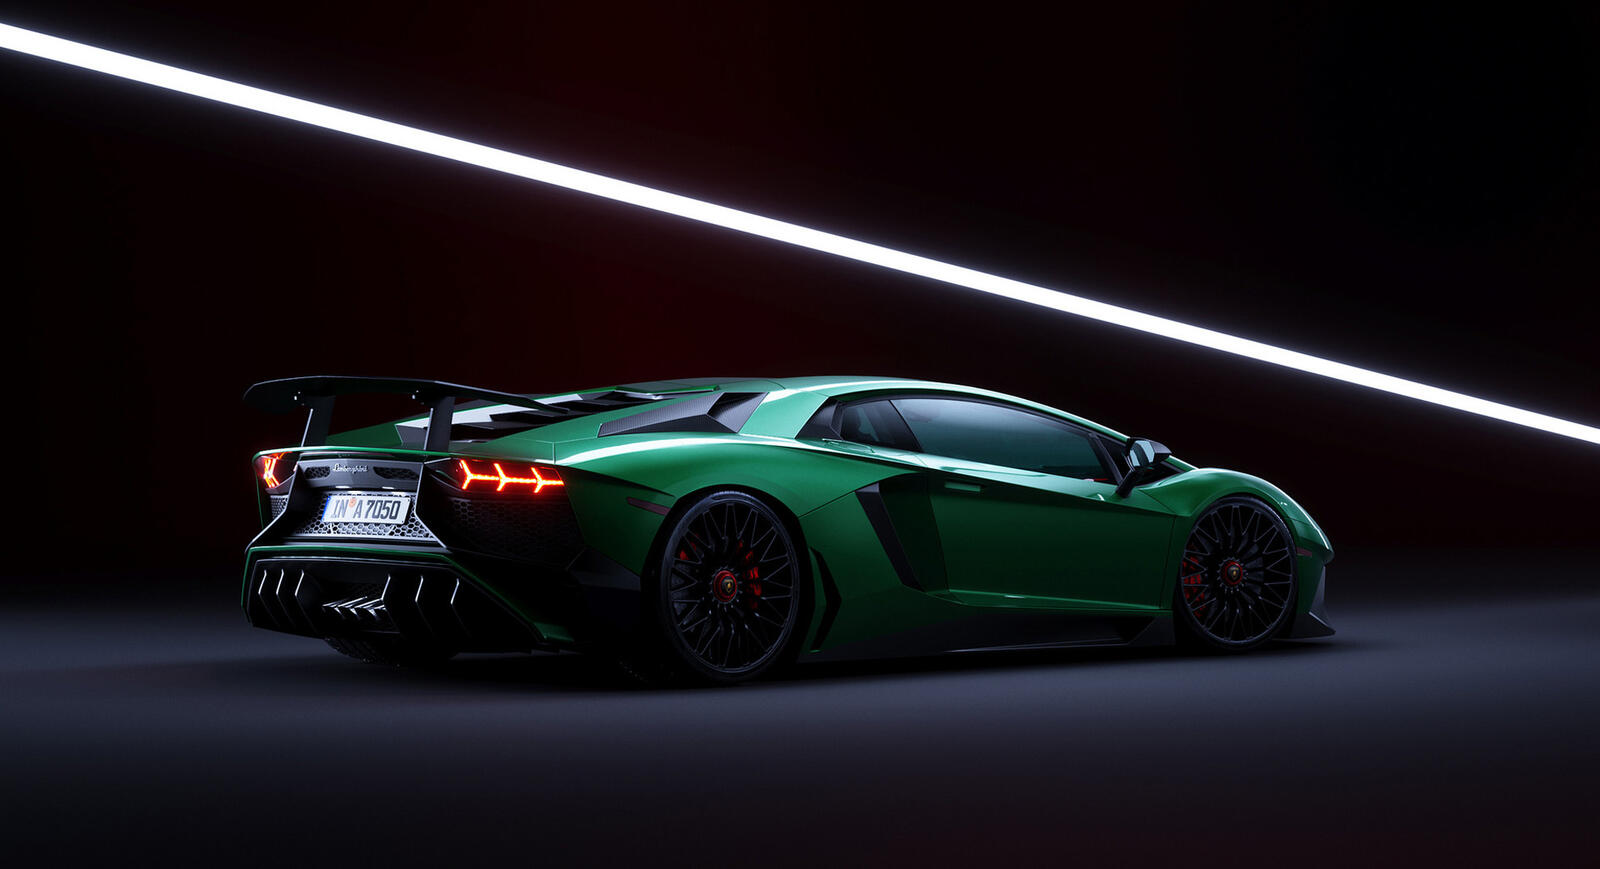 Wallpapers Lamborghini view from behind green car on the desktop